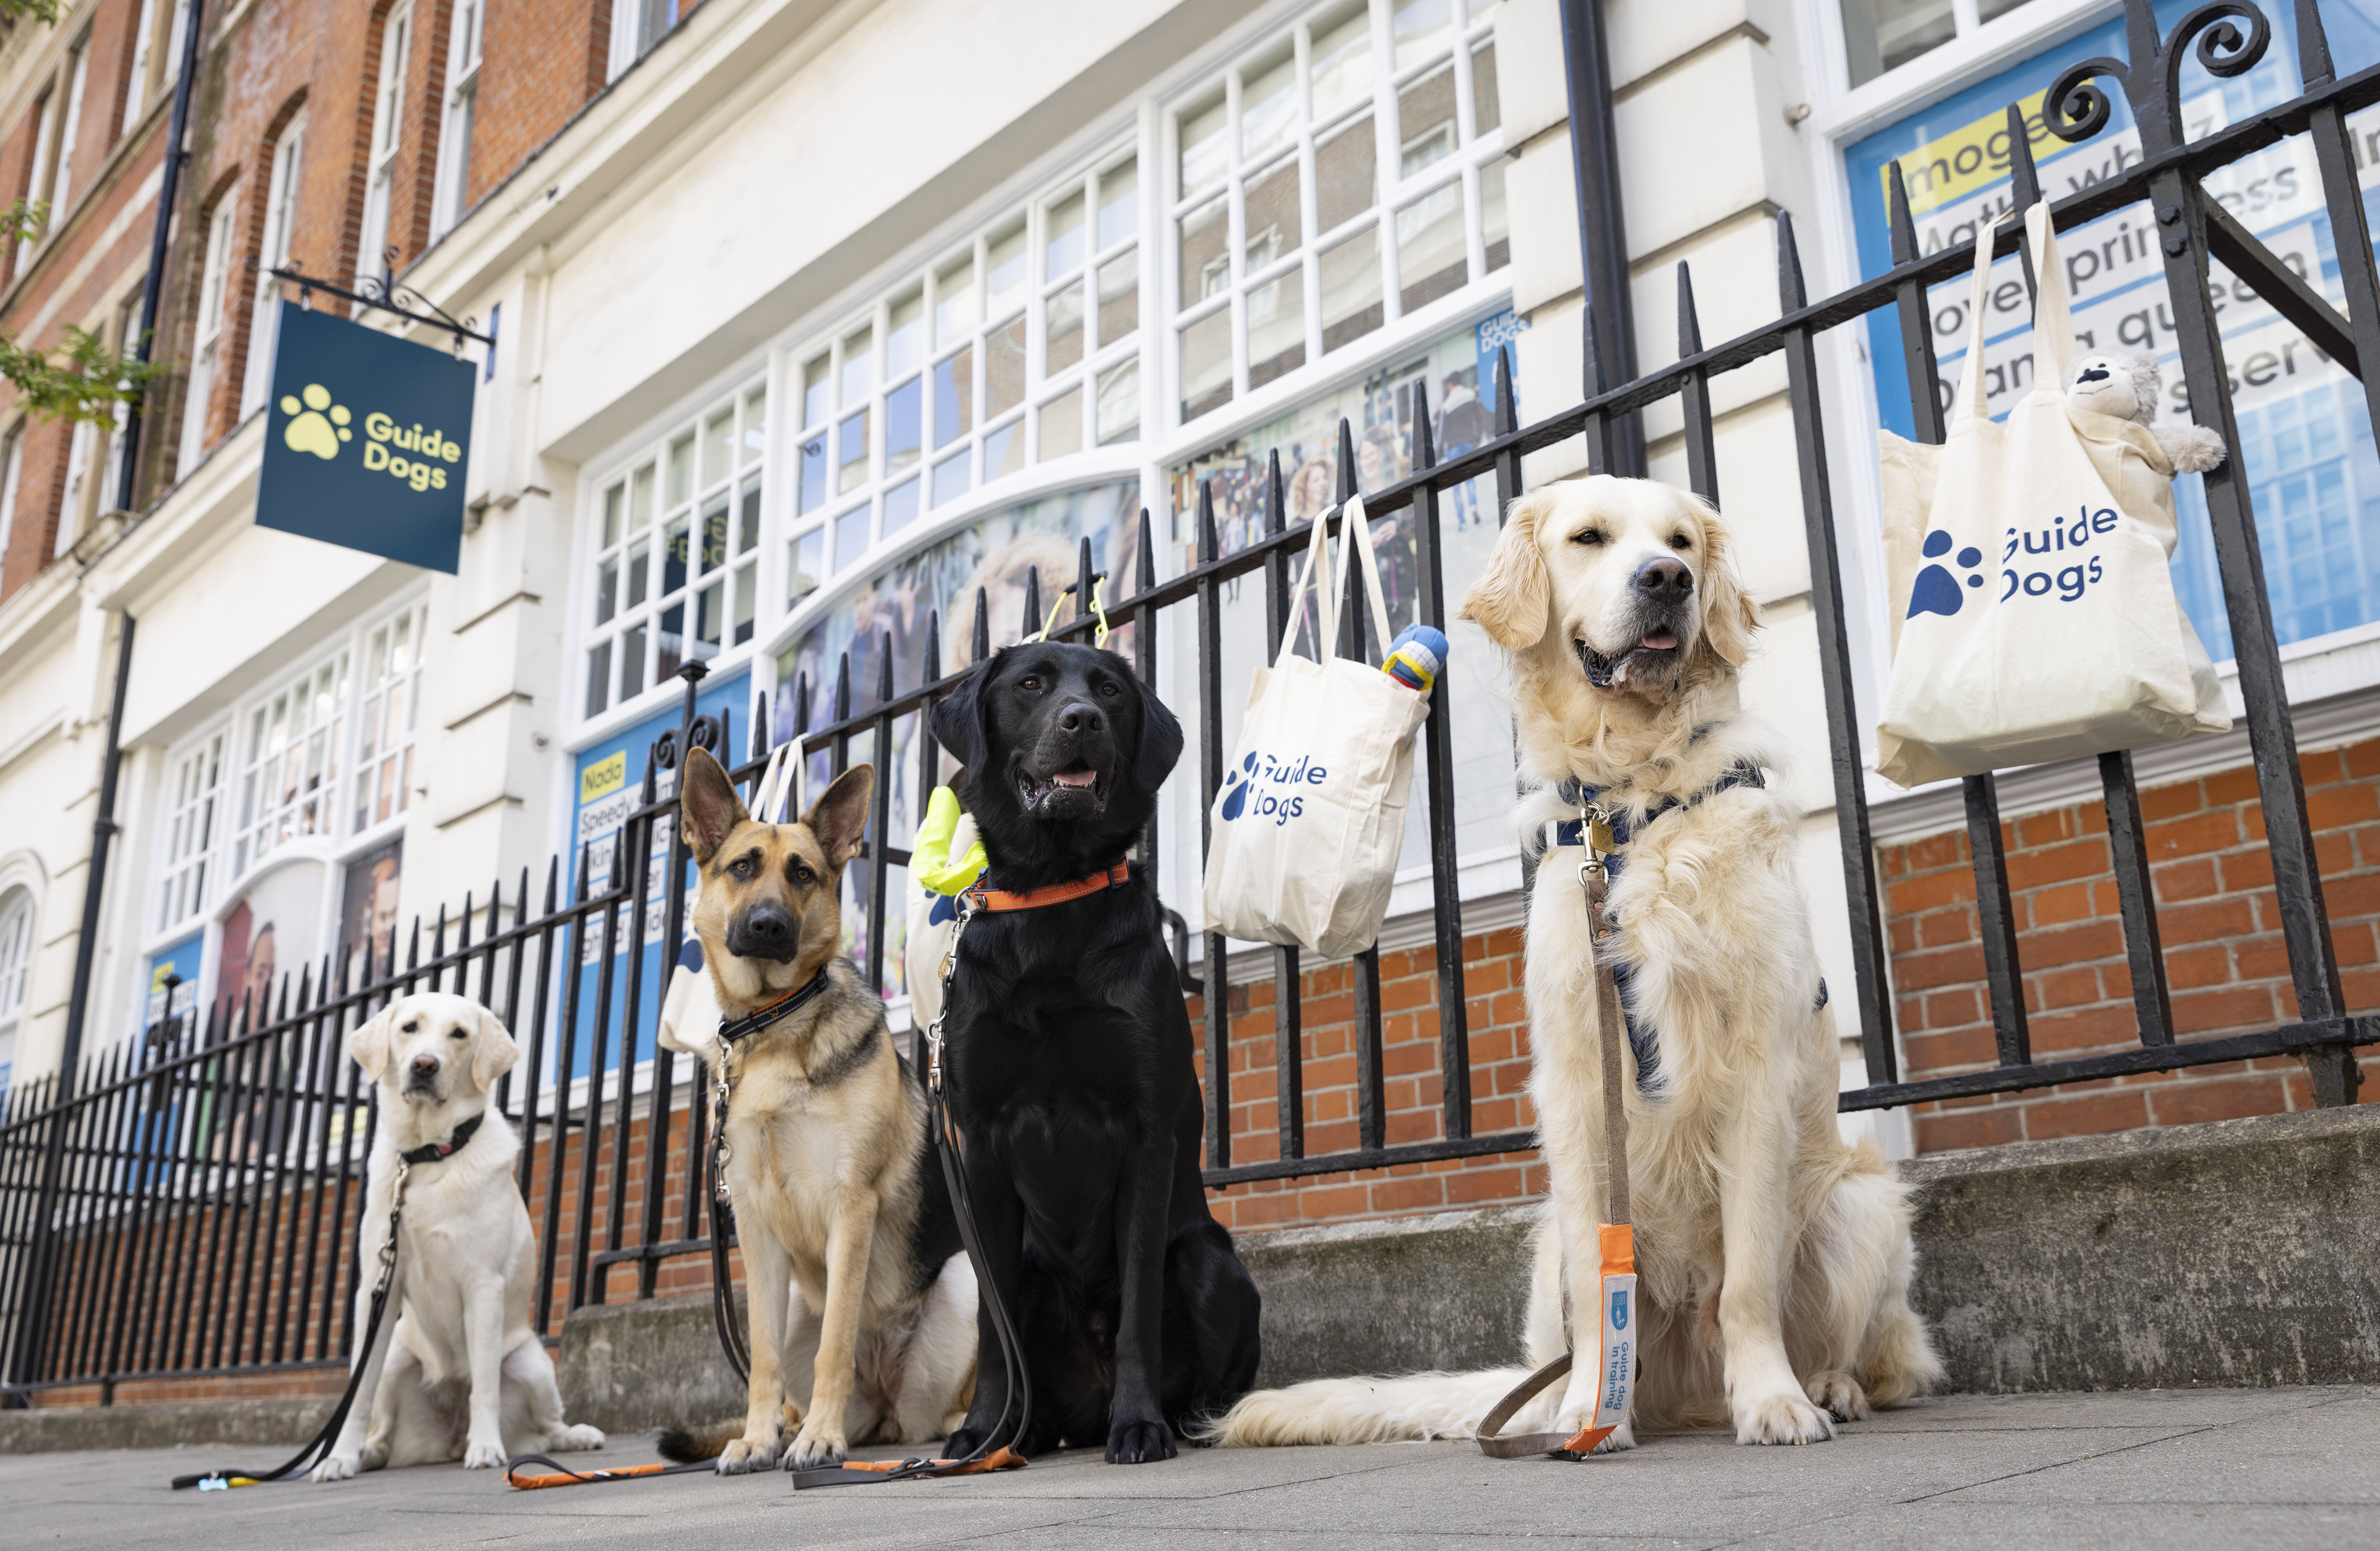 Four trainee guide dogs, a yellow lab x, a German shepherd, a black lab x and a golden retriever, sit in a line outside the Guide Dogs London office. Four tote bags full of toys are hanging on the iron railings behind them.